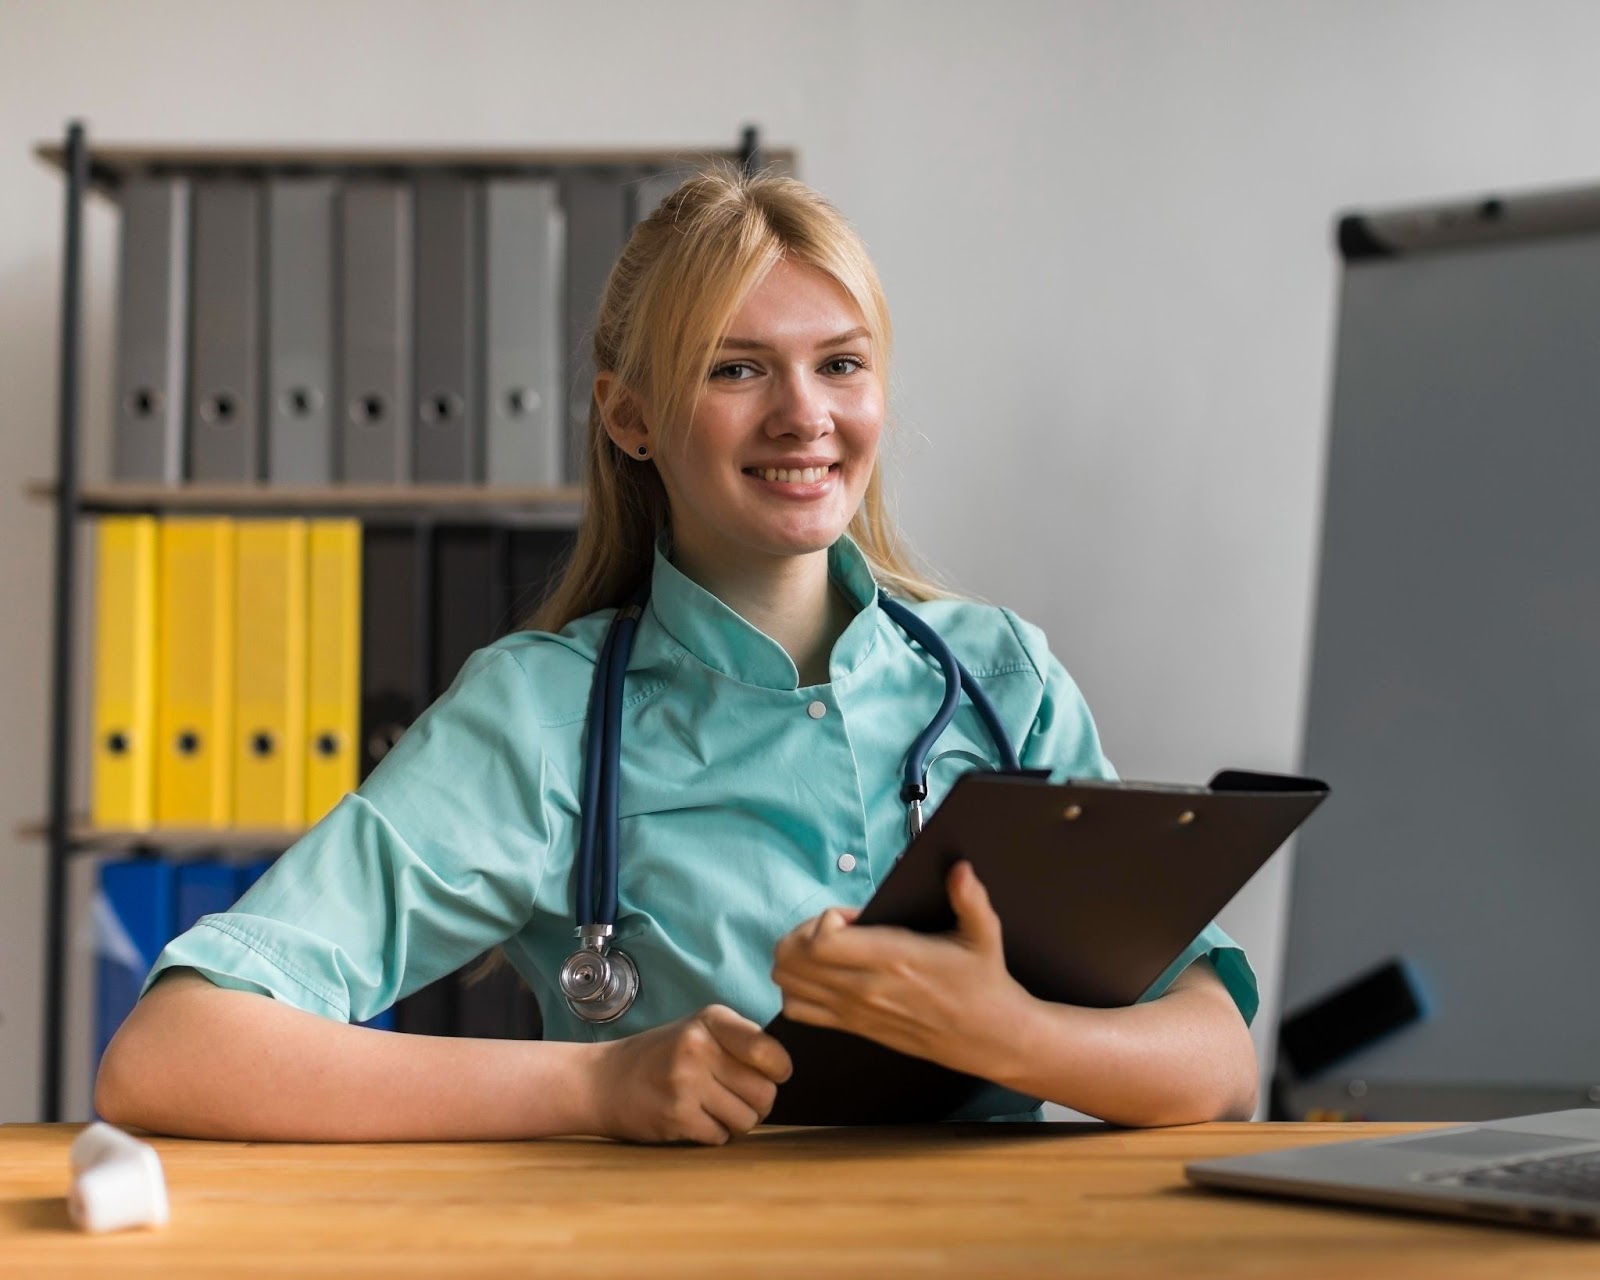 Smiley female nurse in the office with notepad and stethoscope